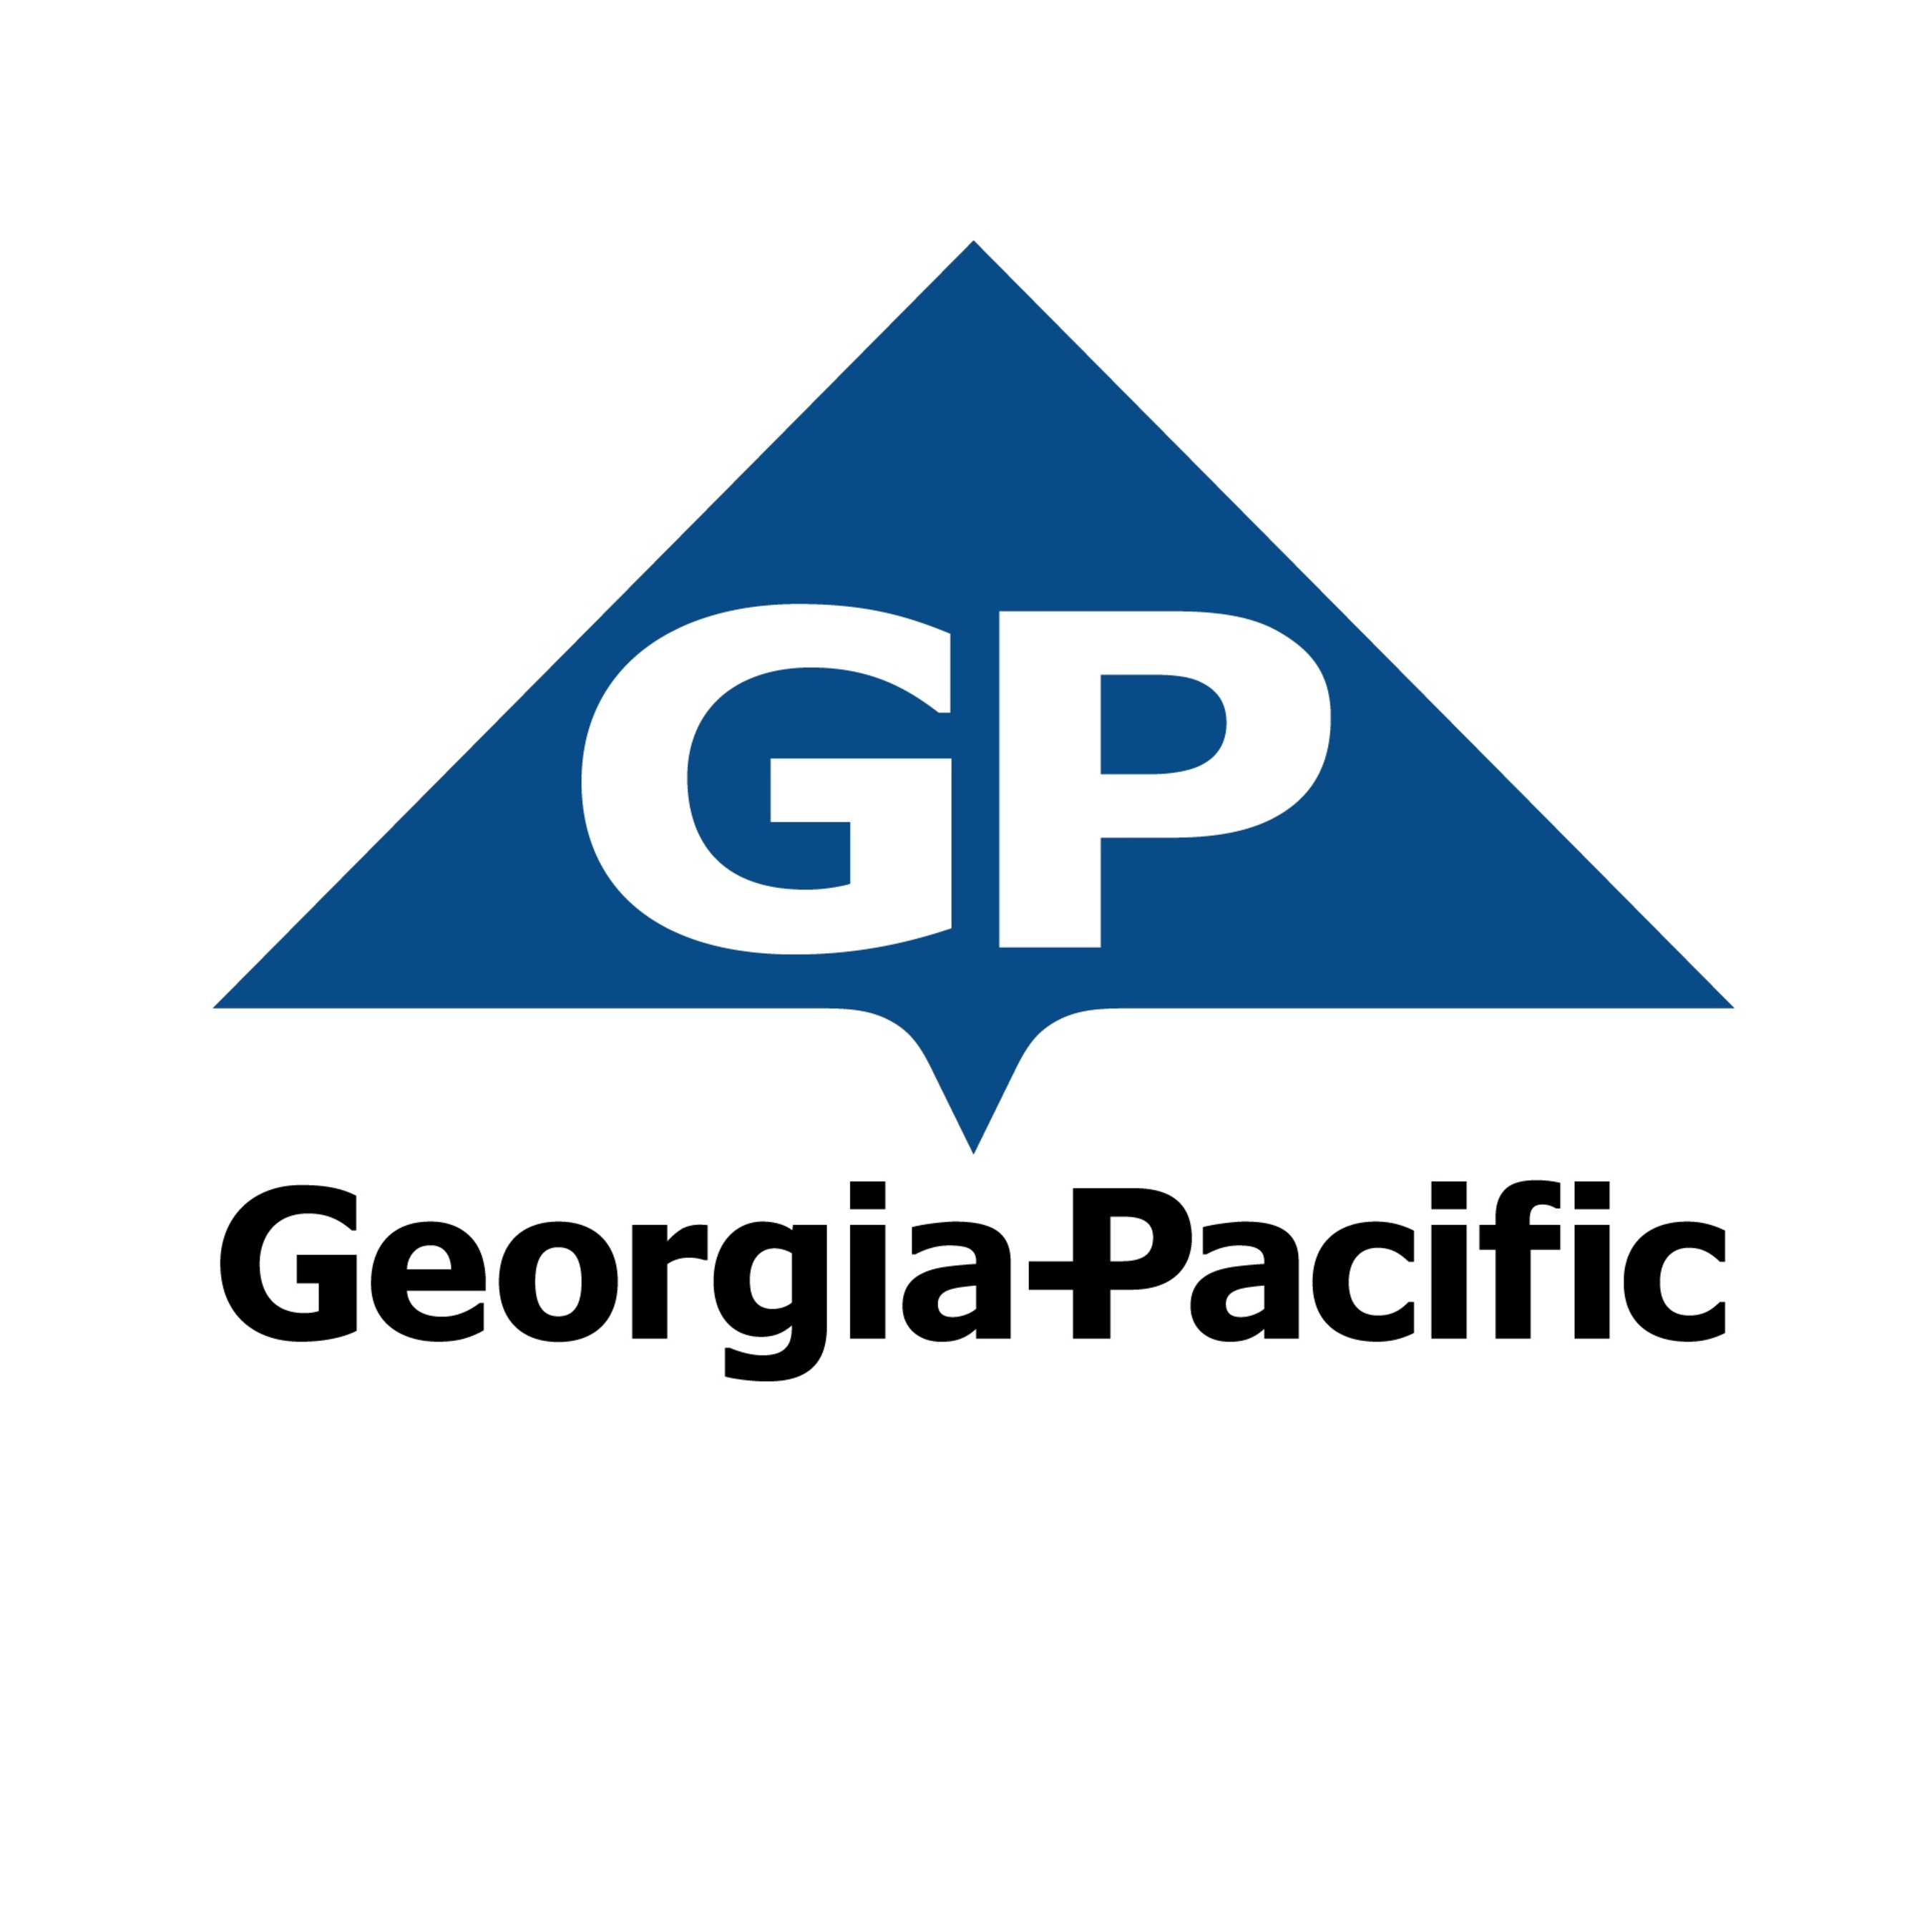 Georgia-Pacific Announces Agreement To Sell Engineered Lumber Business To  Boise Cascade